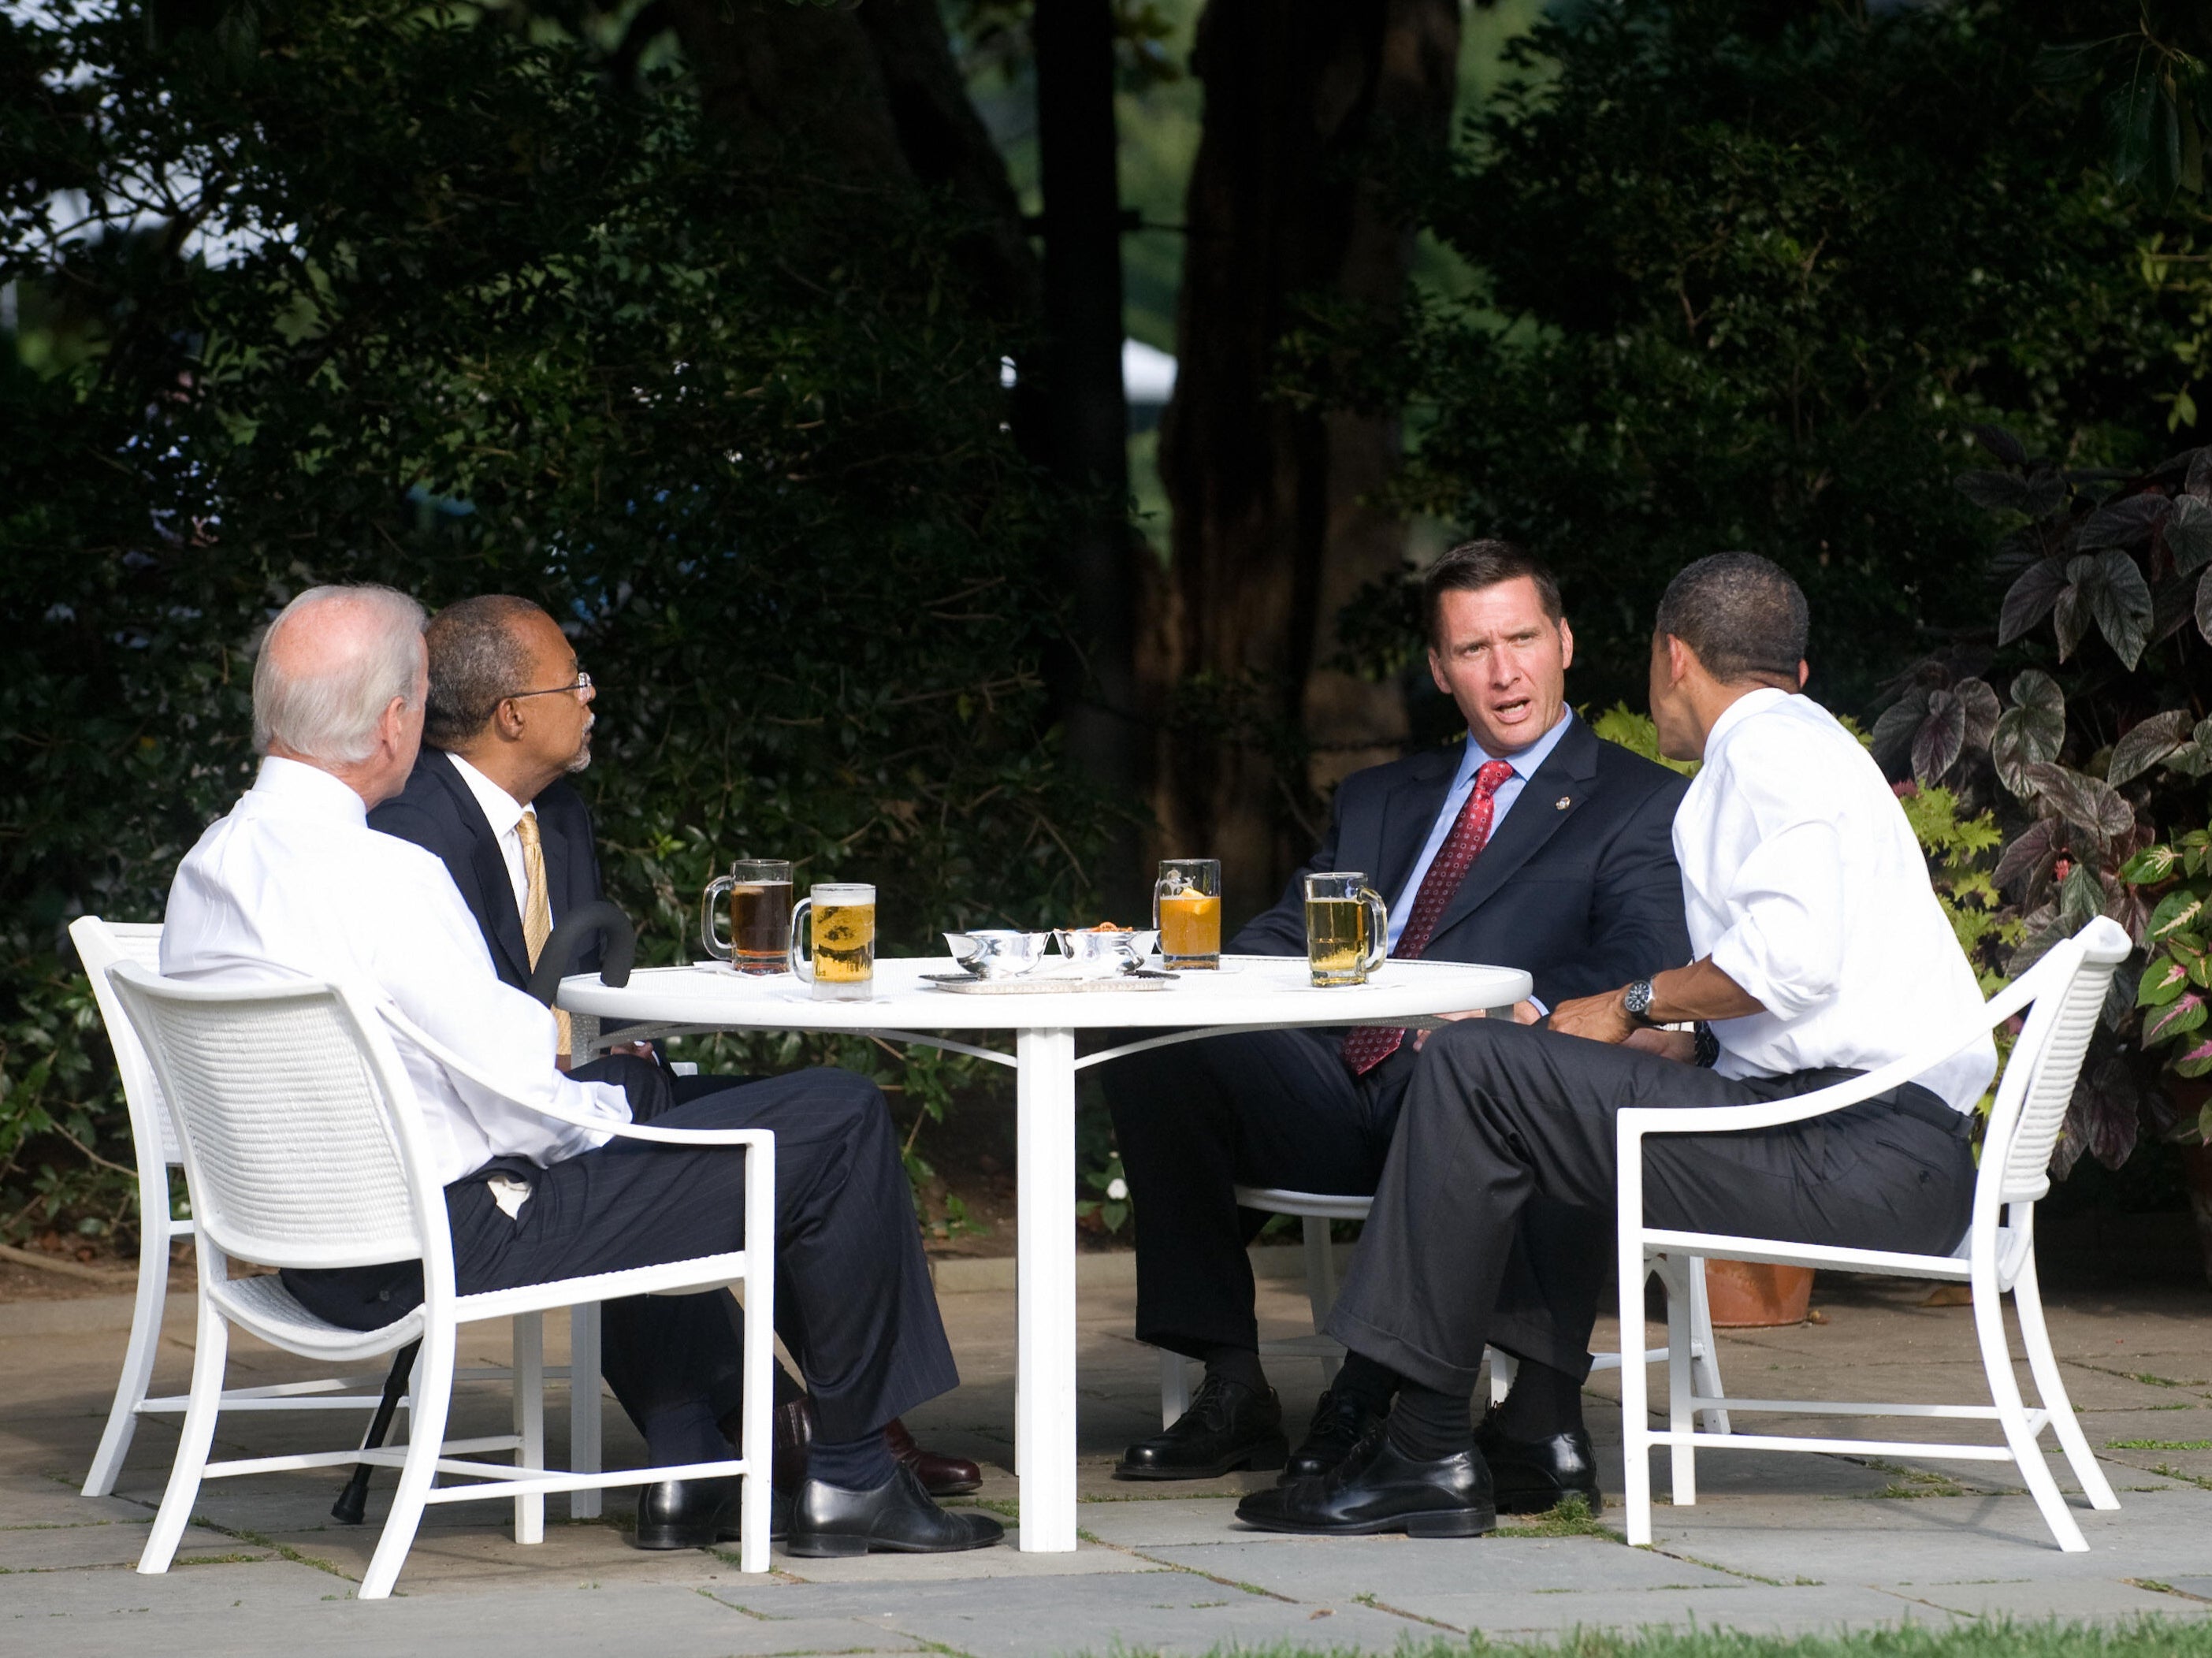 Joe Biden and Barack Obama enjoying a beer with Harvard professor Henry Louis Gates Jr and Massachusetts police sergeant James Crowley on the South Lawn of the White House in July 2009